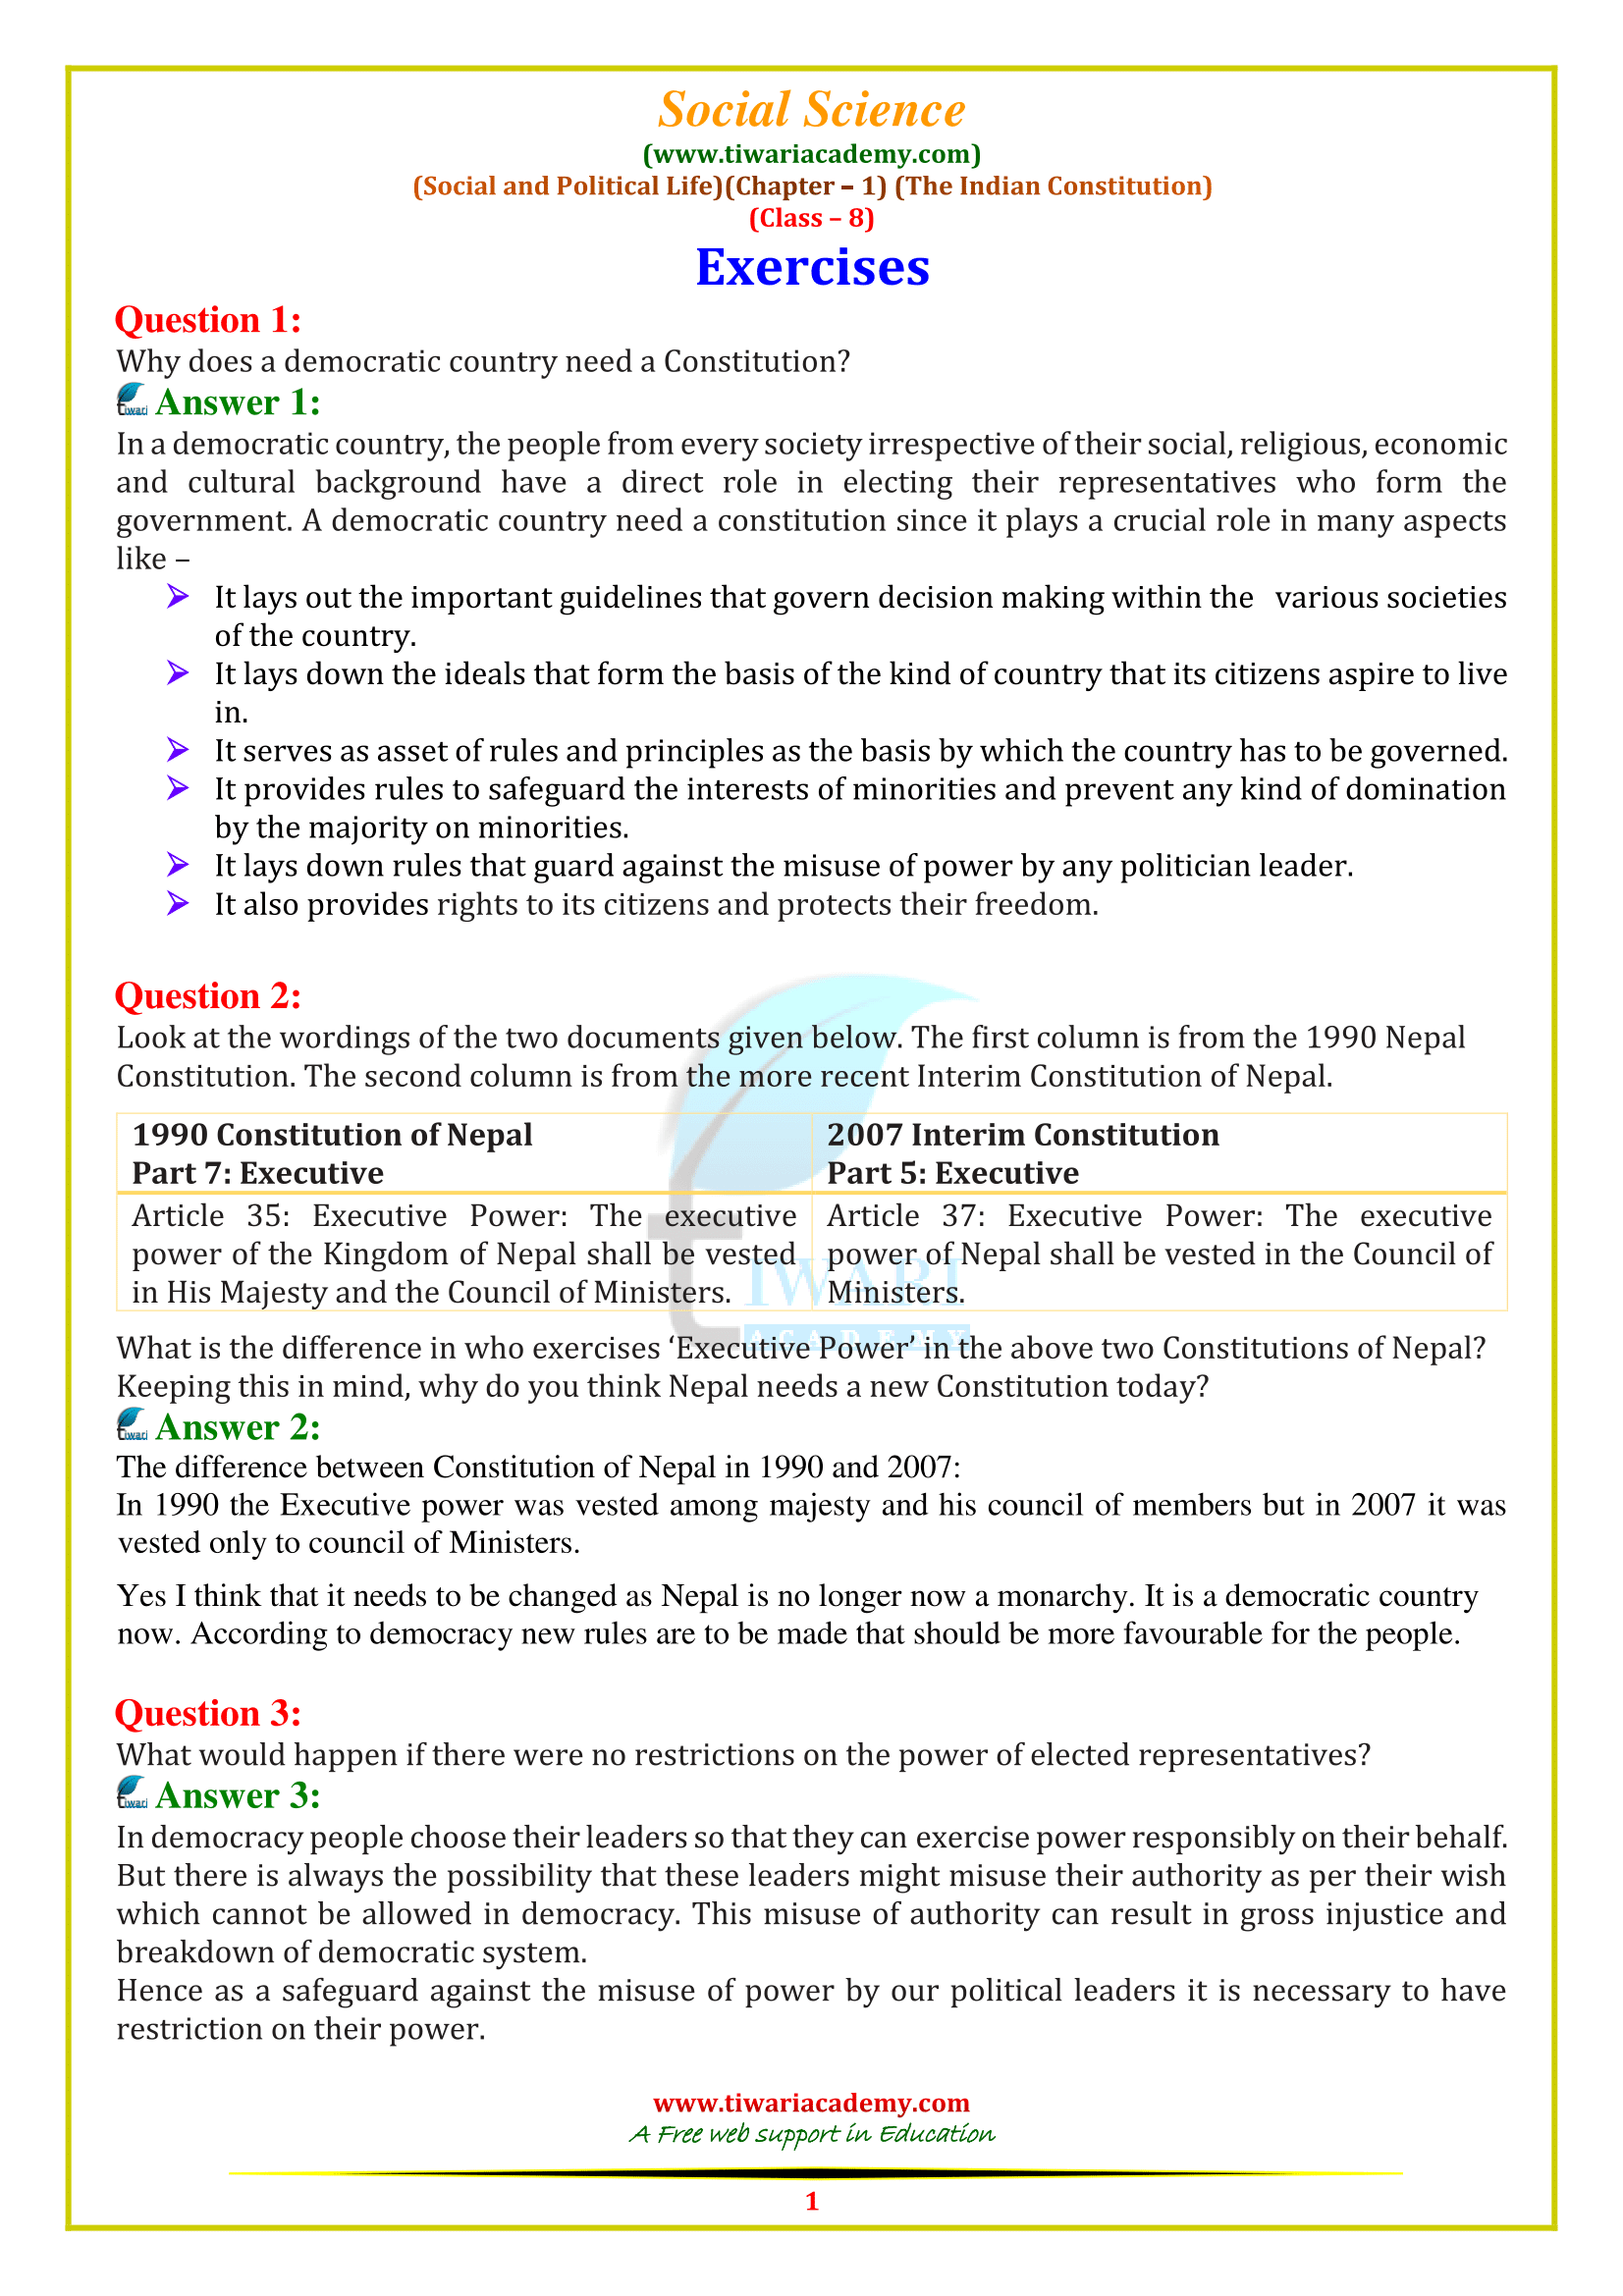 NCERT Solutions for Class 8 Social Science Civics Chapter 1 The Indian Constitution